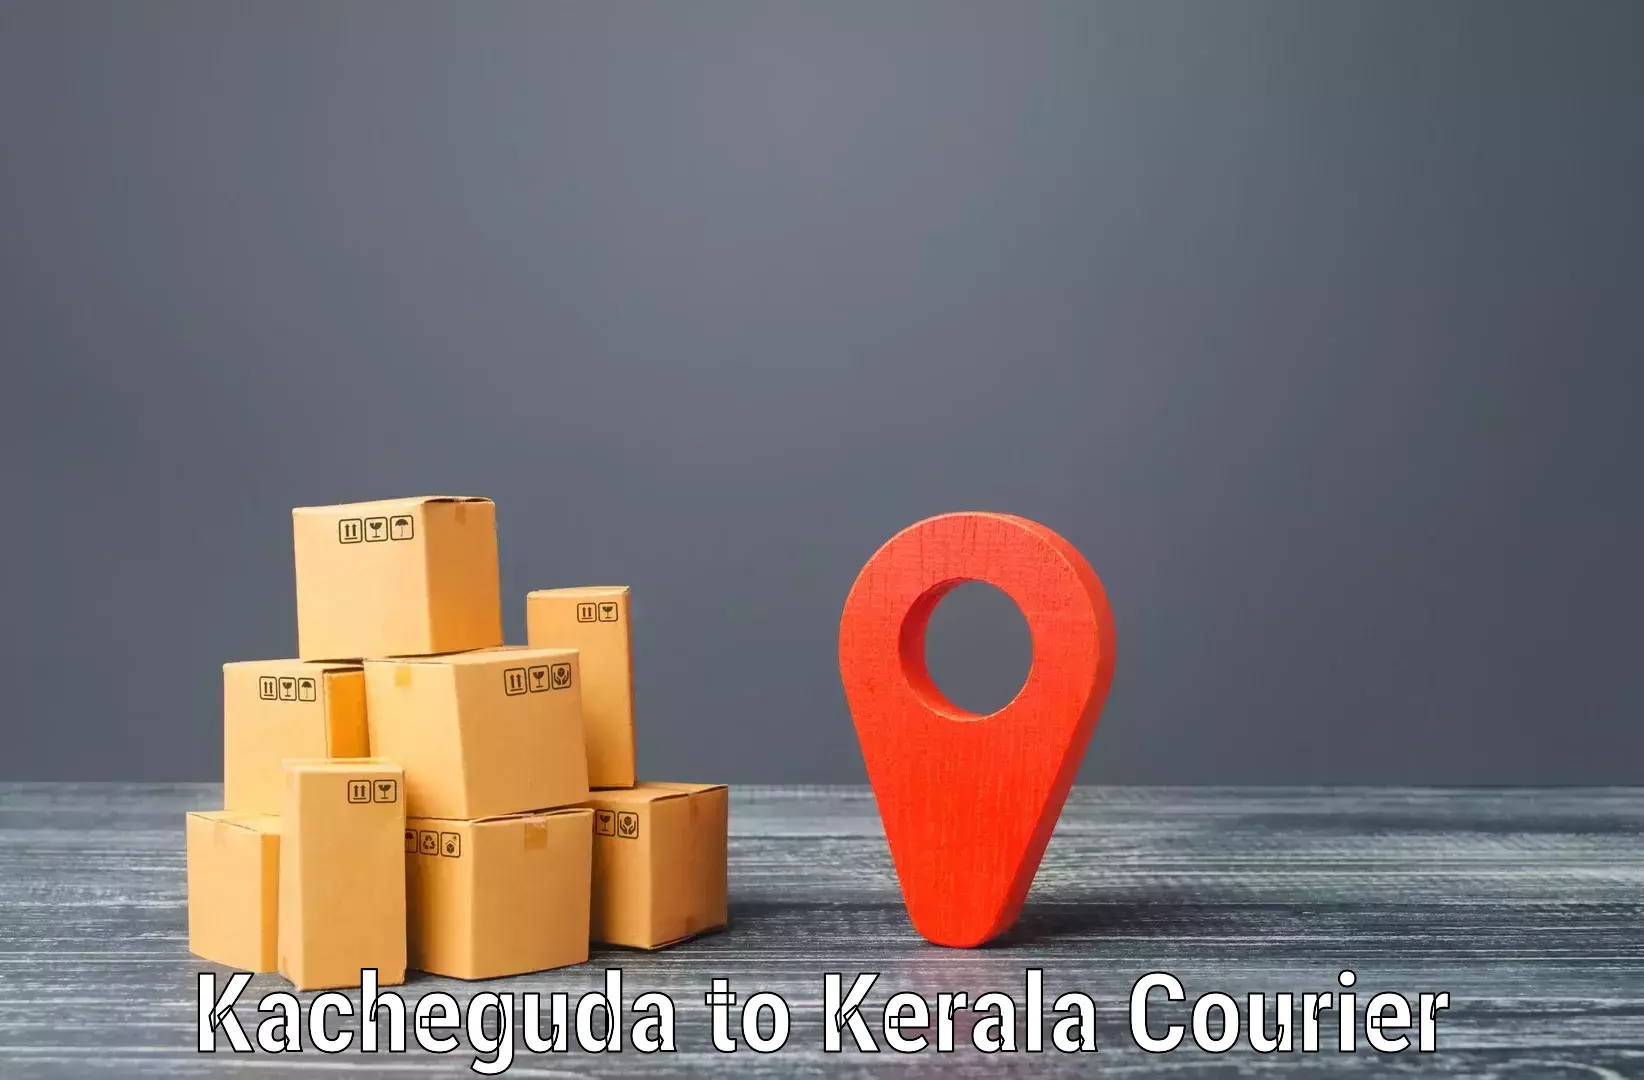 Express delivery solutions Kacheguda to Kozhikode